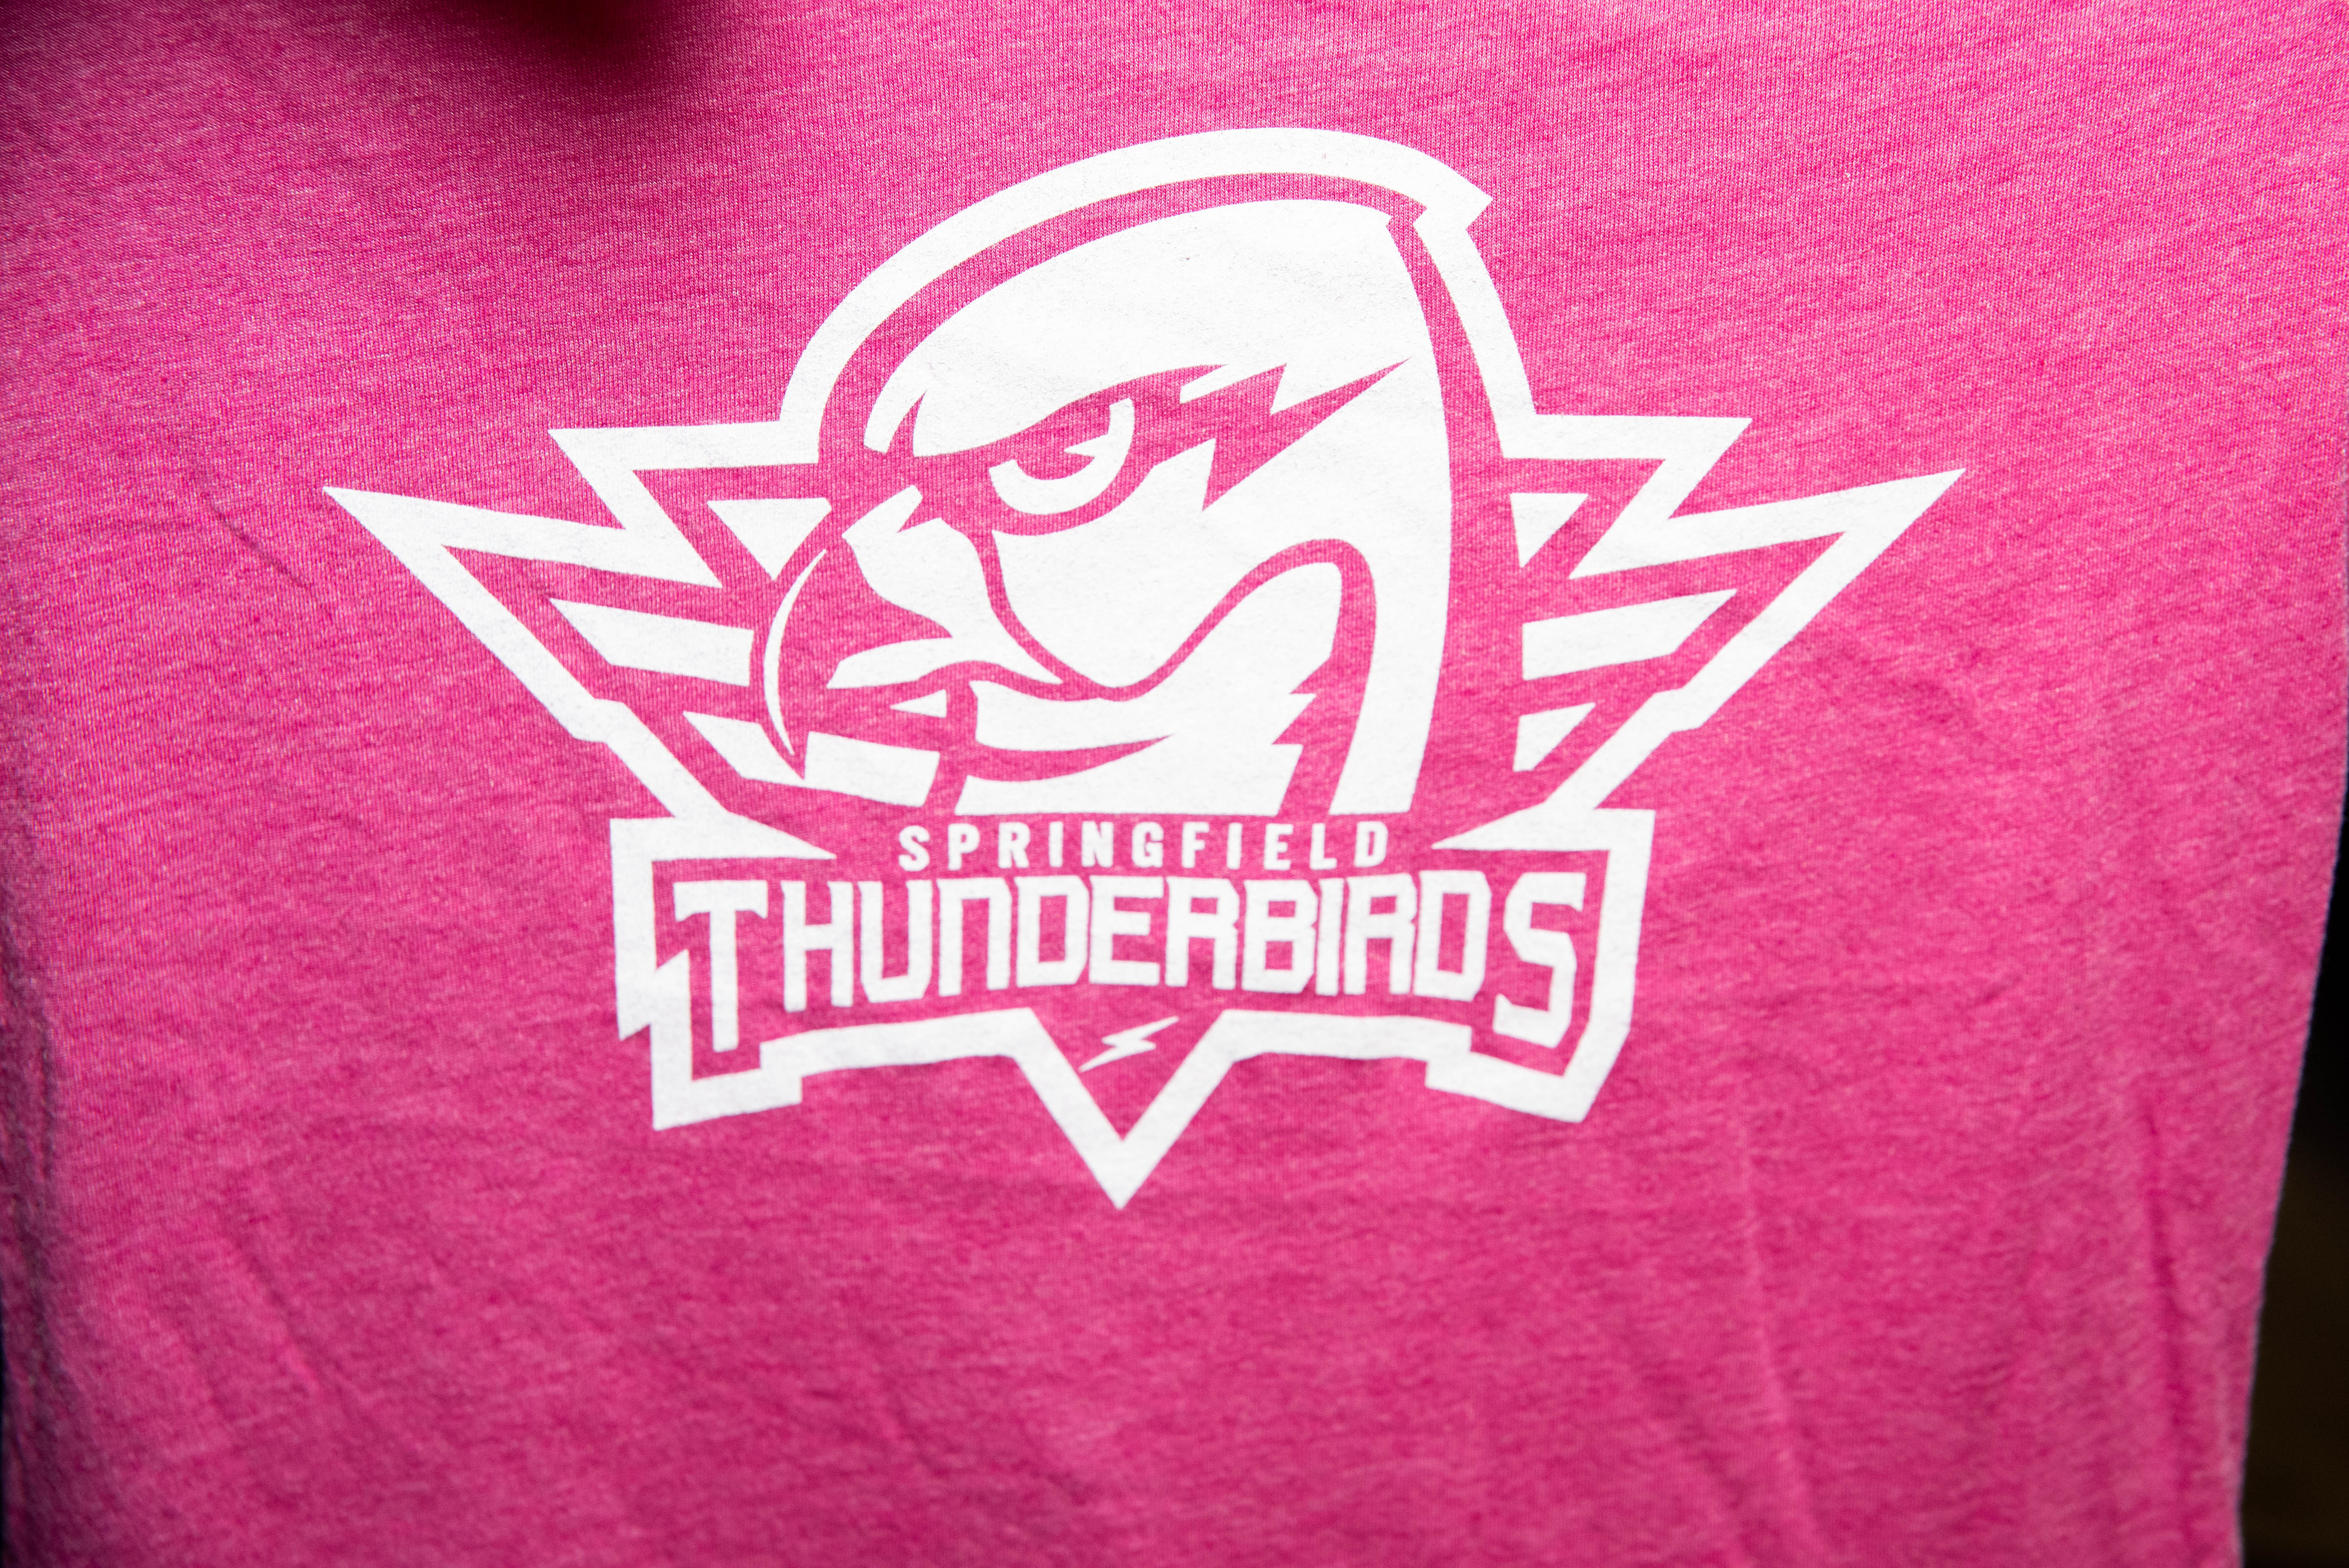 Thunderbirds preparing for 'Pink in the Rink' to benefit Rays of Hope